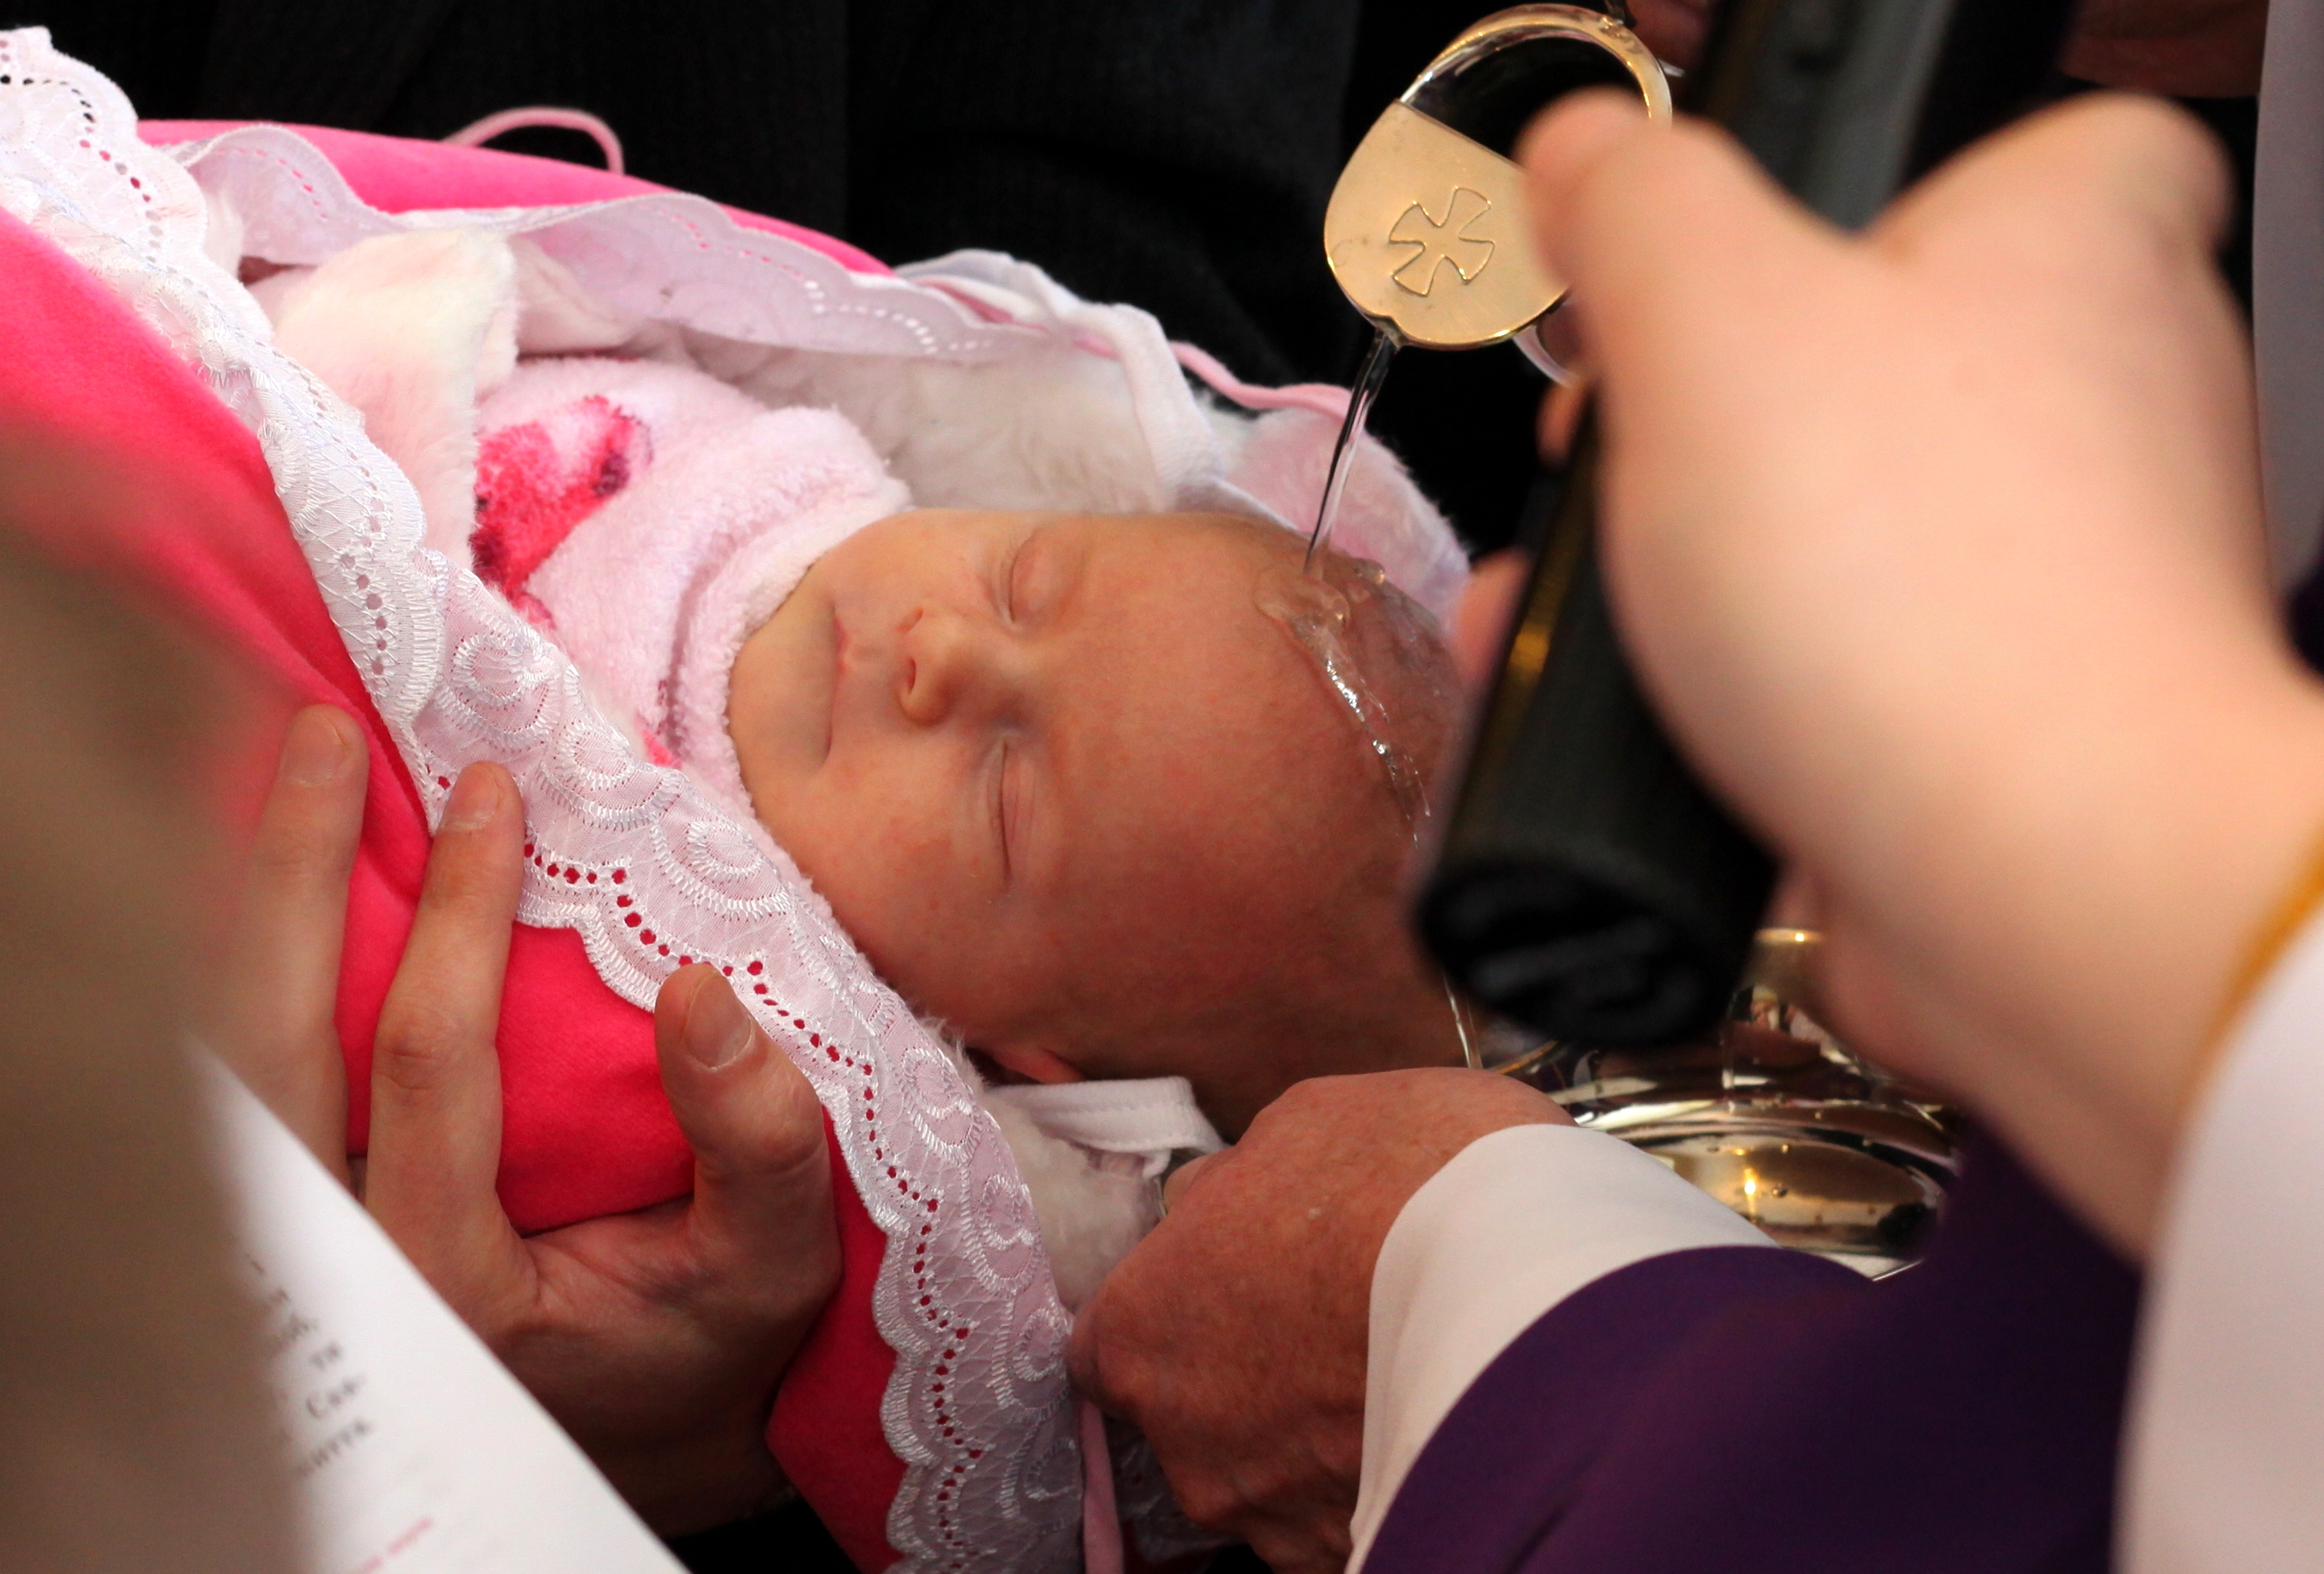 baptism of a baby girl in a Catholic church, picture 5